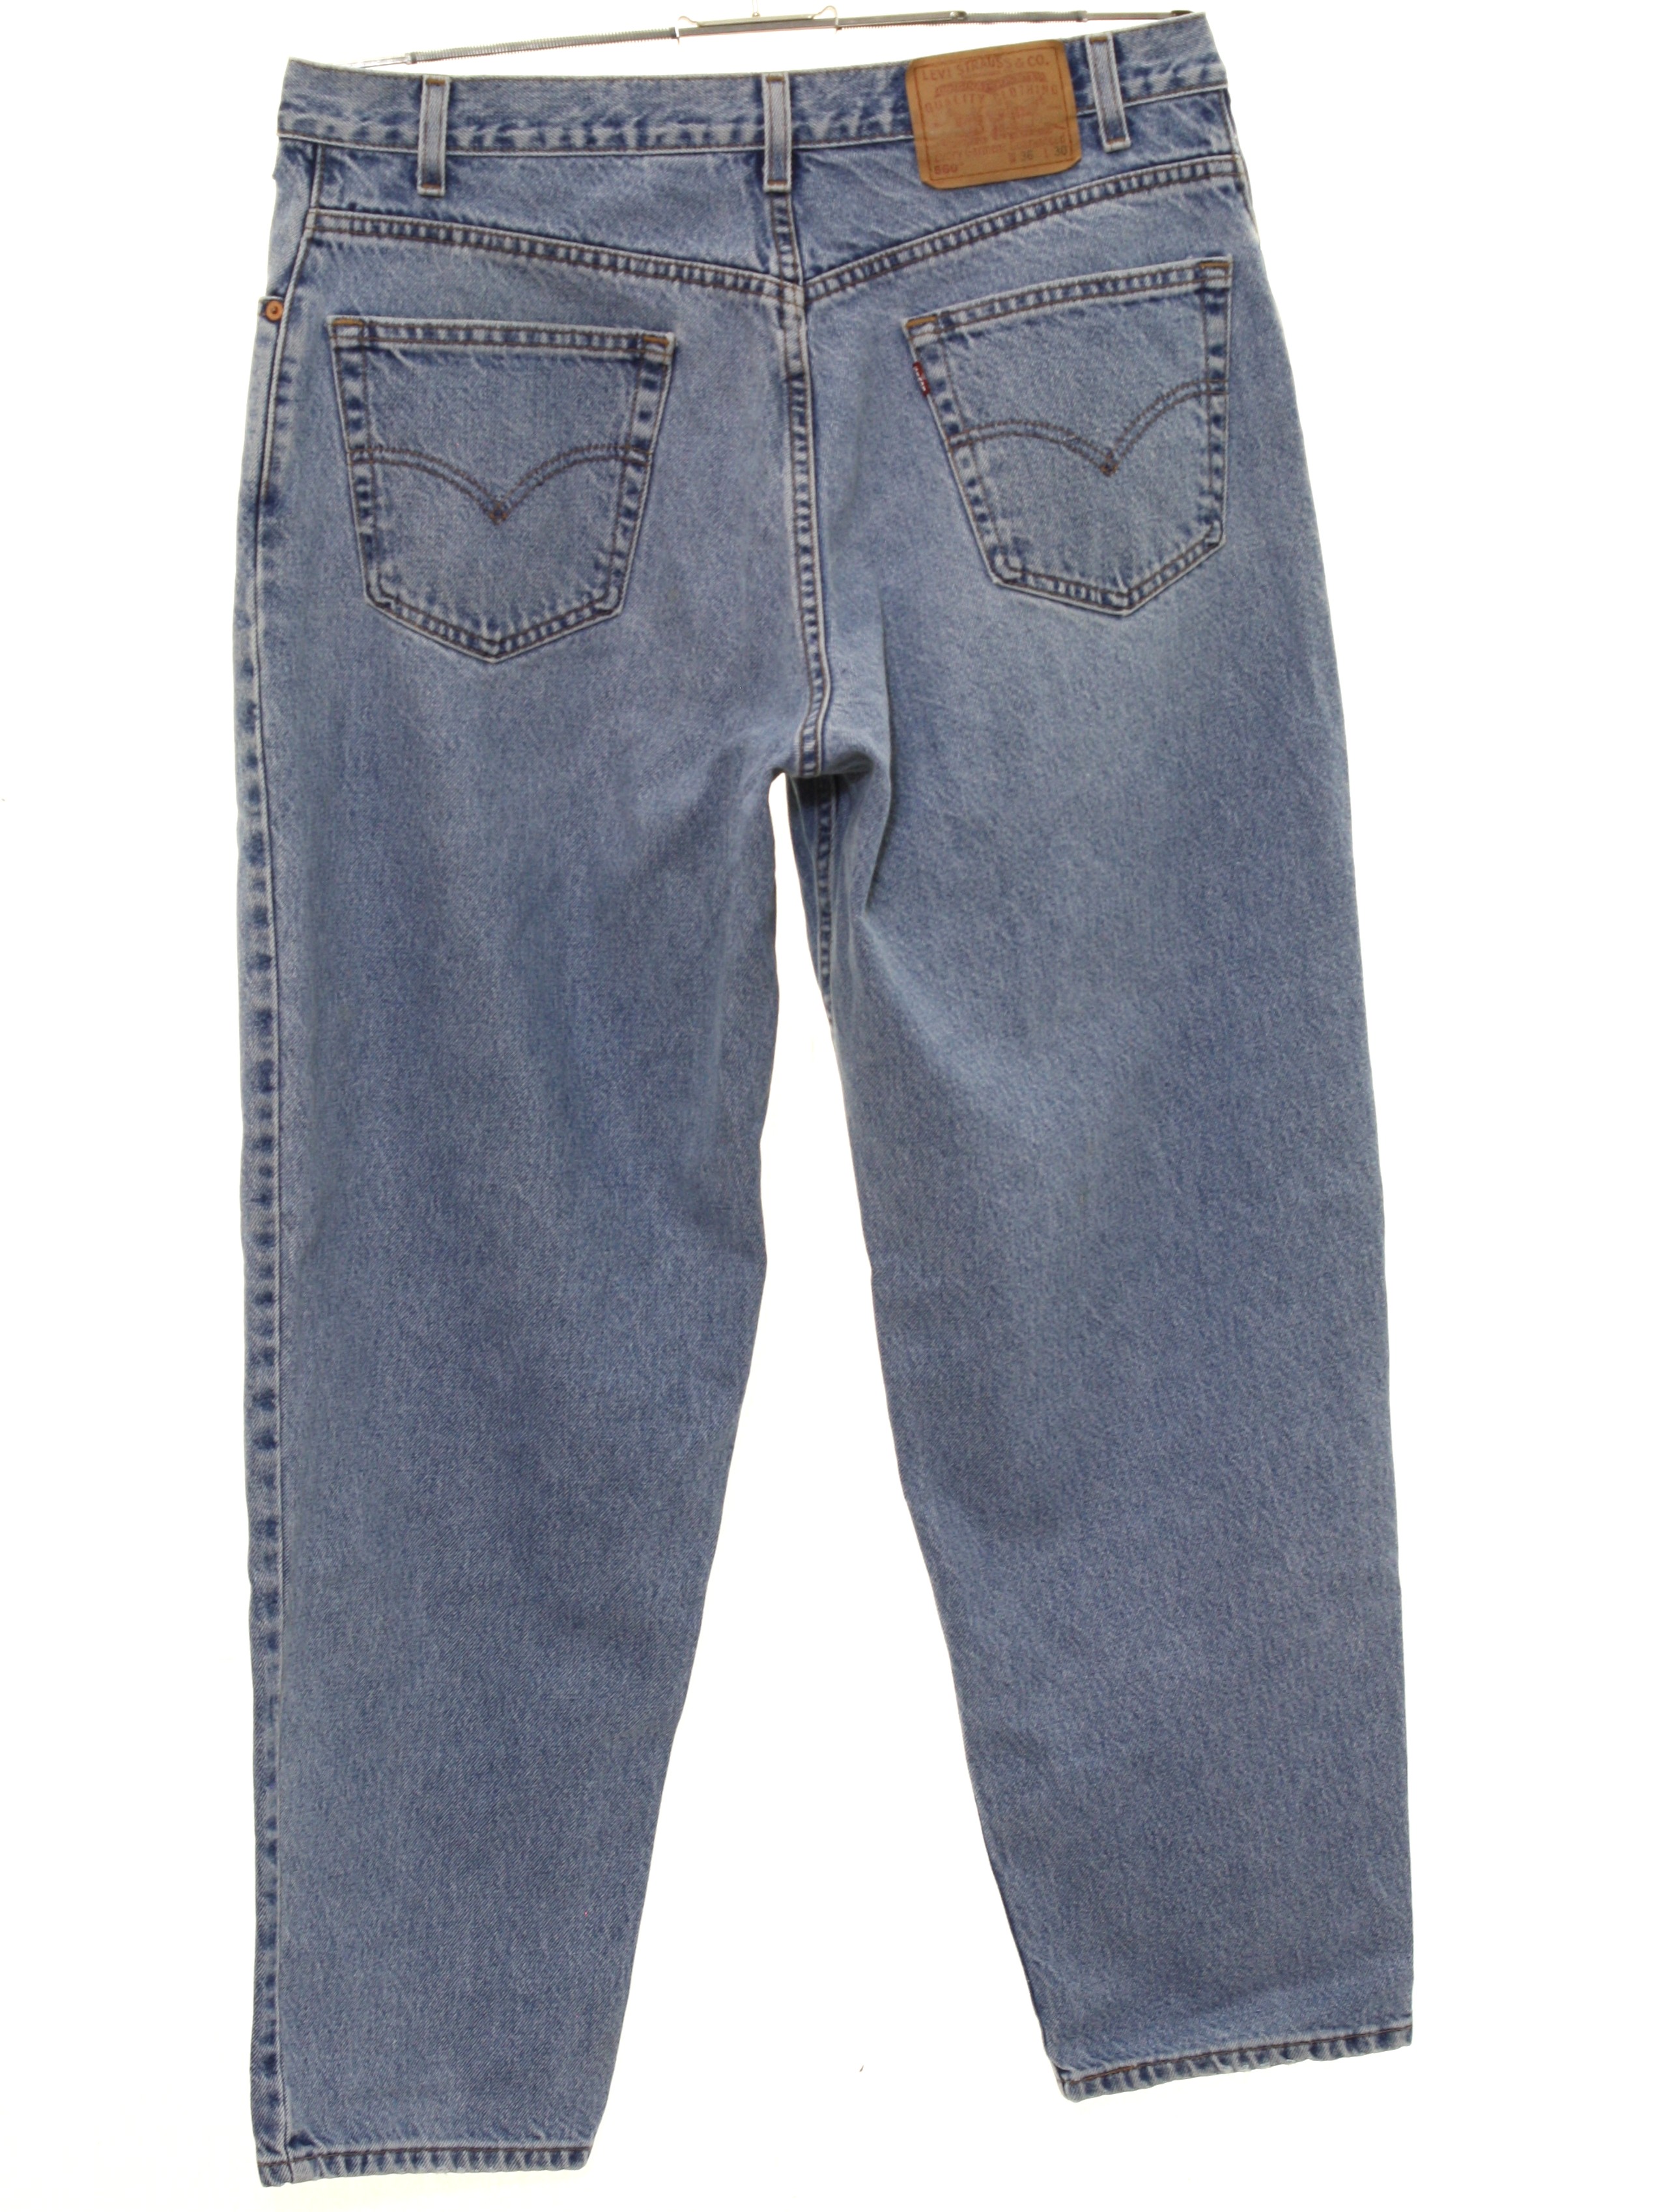 Vintage Levis 560 1990s Pants: 90s -Levis 560- Mens slightly faded and ...